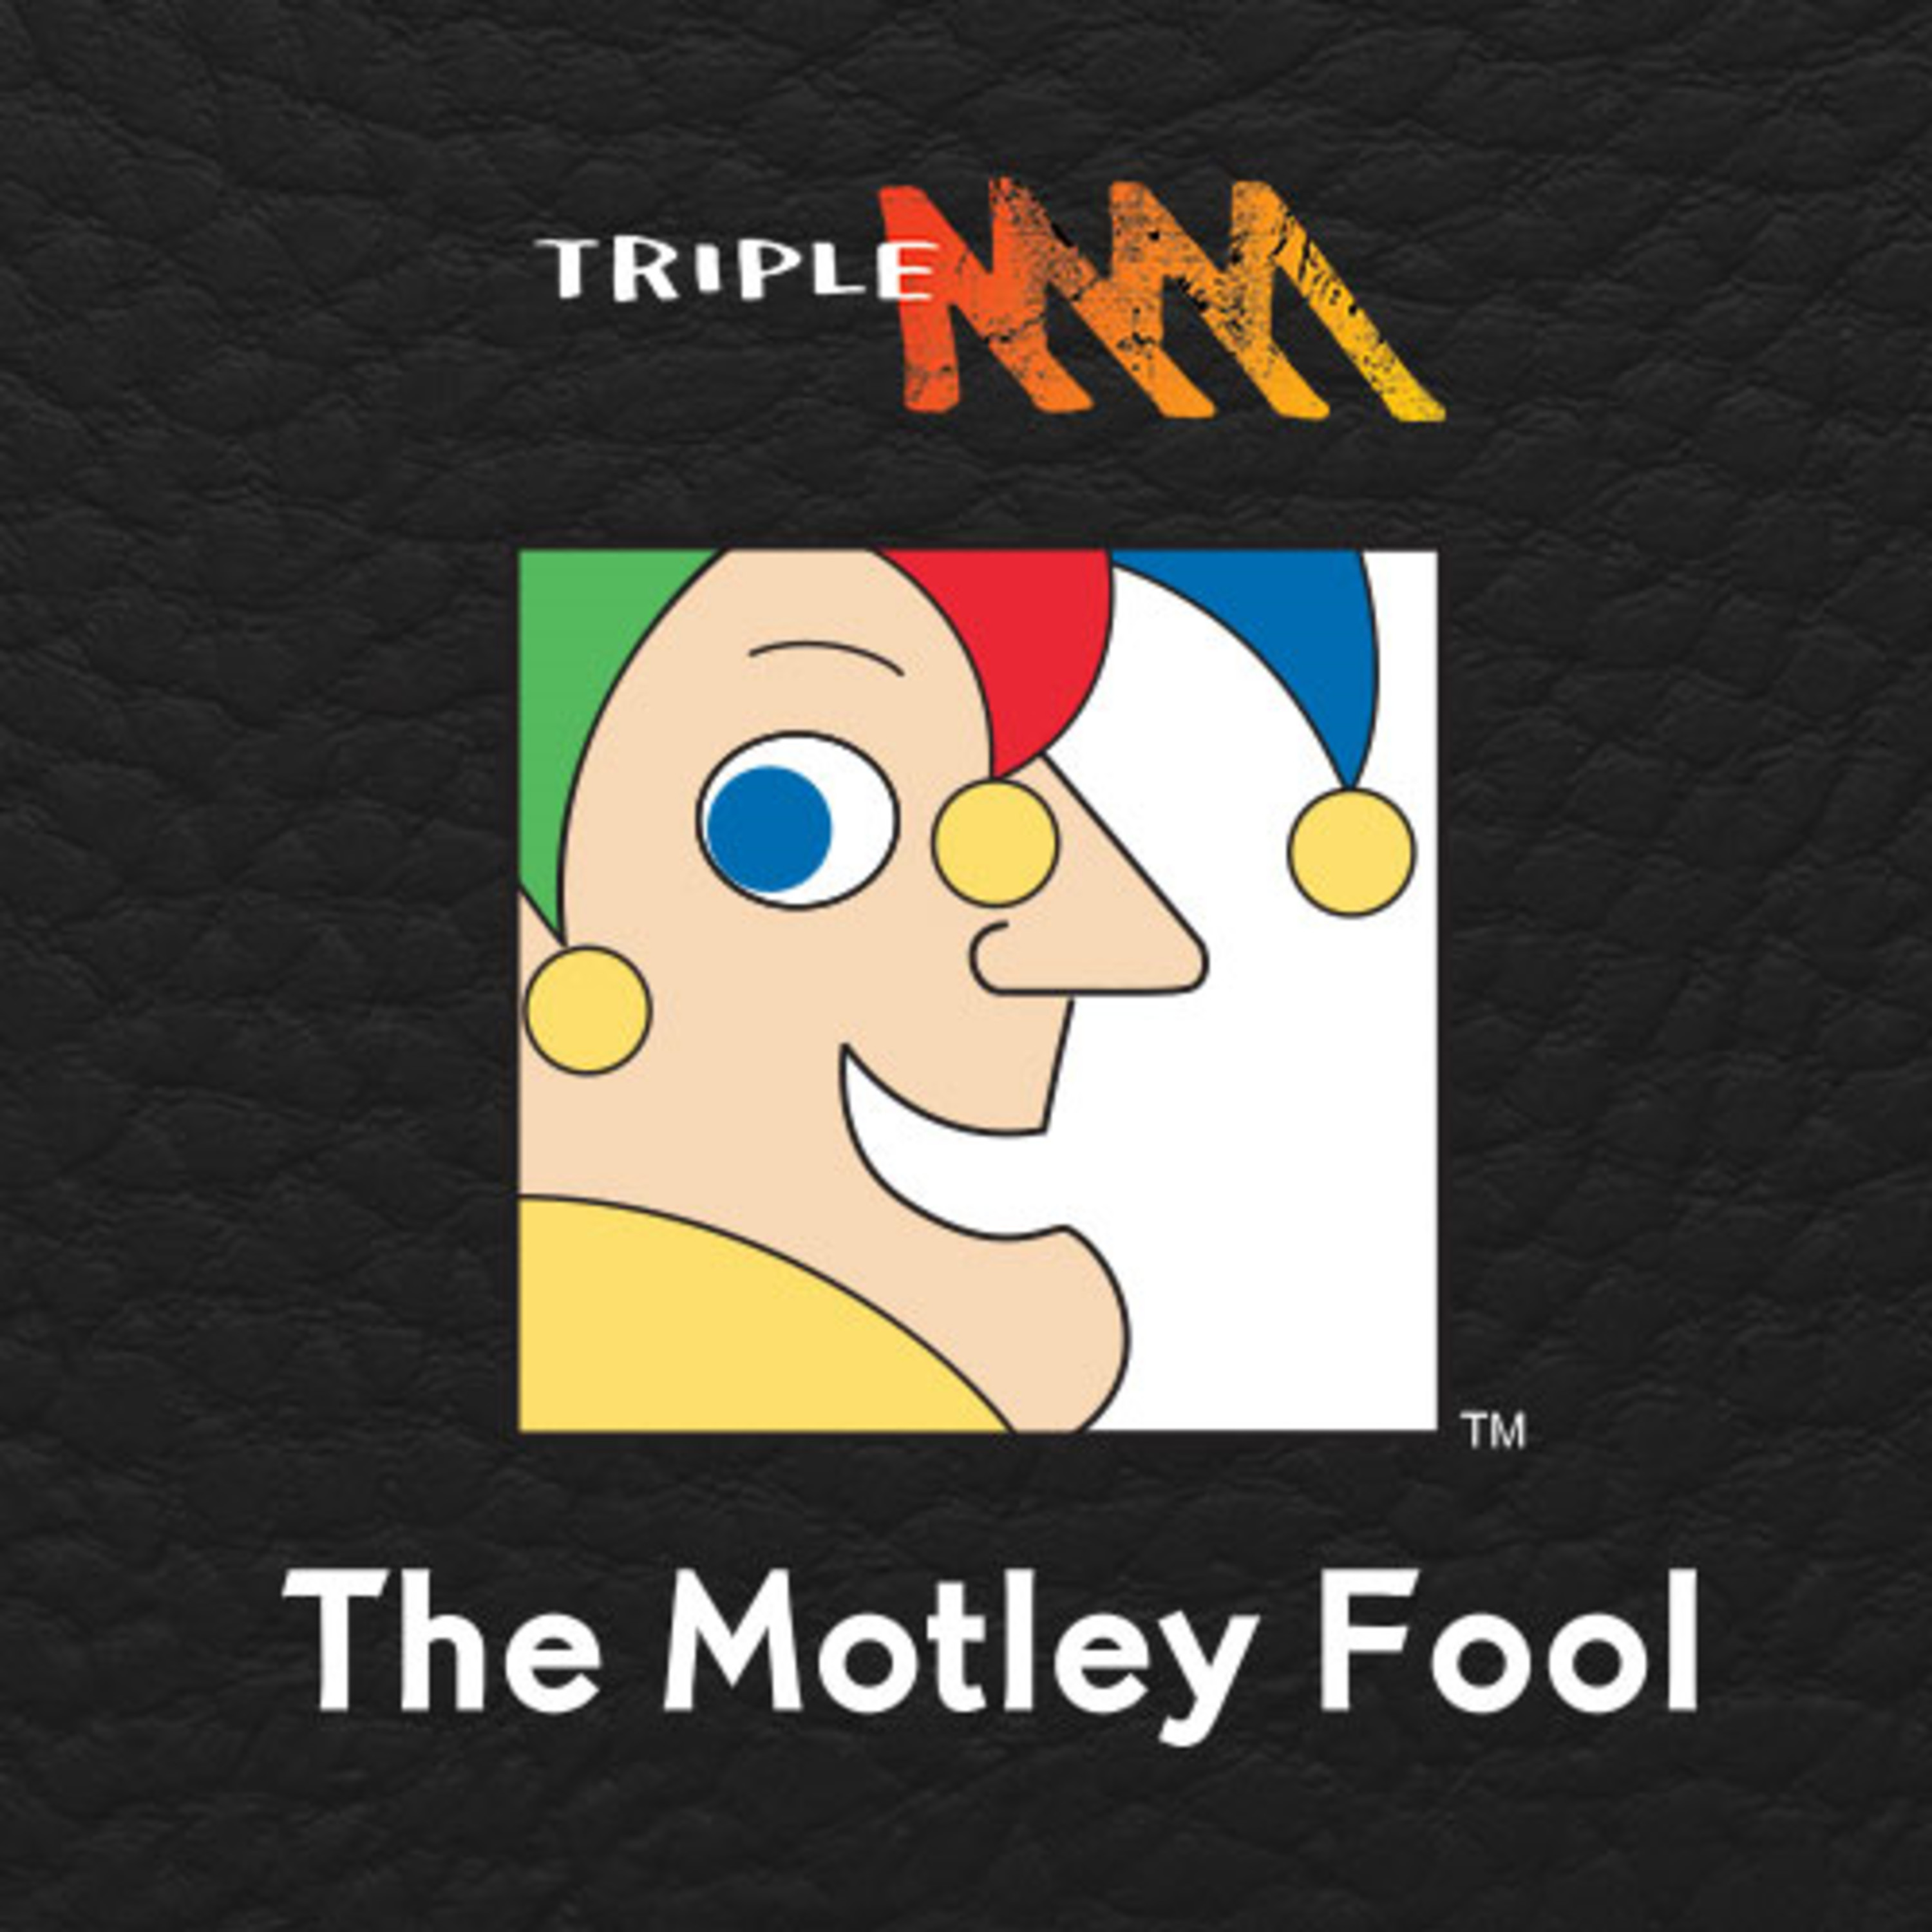 Australia is rich, dumb, and getting dumber, should we break up the Big 4 Banks, Volatility is back - Episode 187 October 11 - Triple M's Motley Fool Money